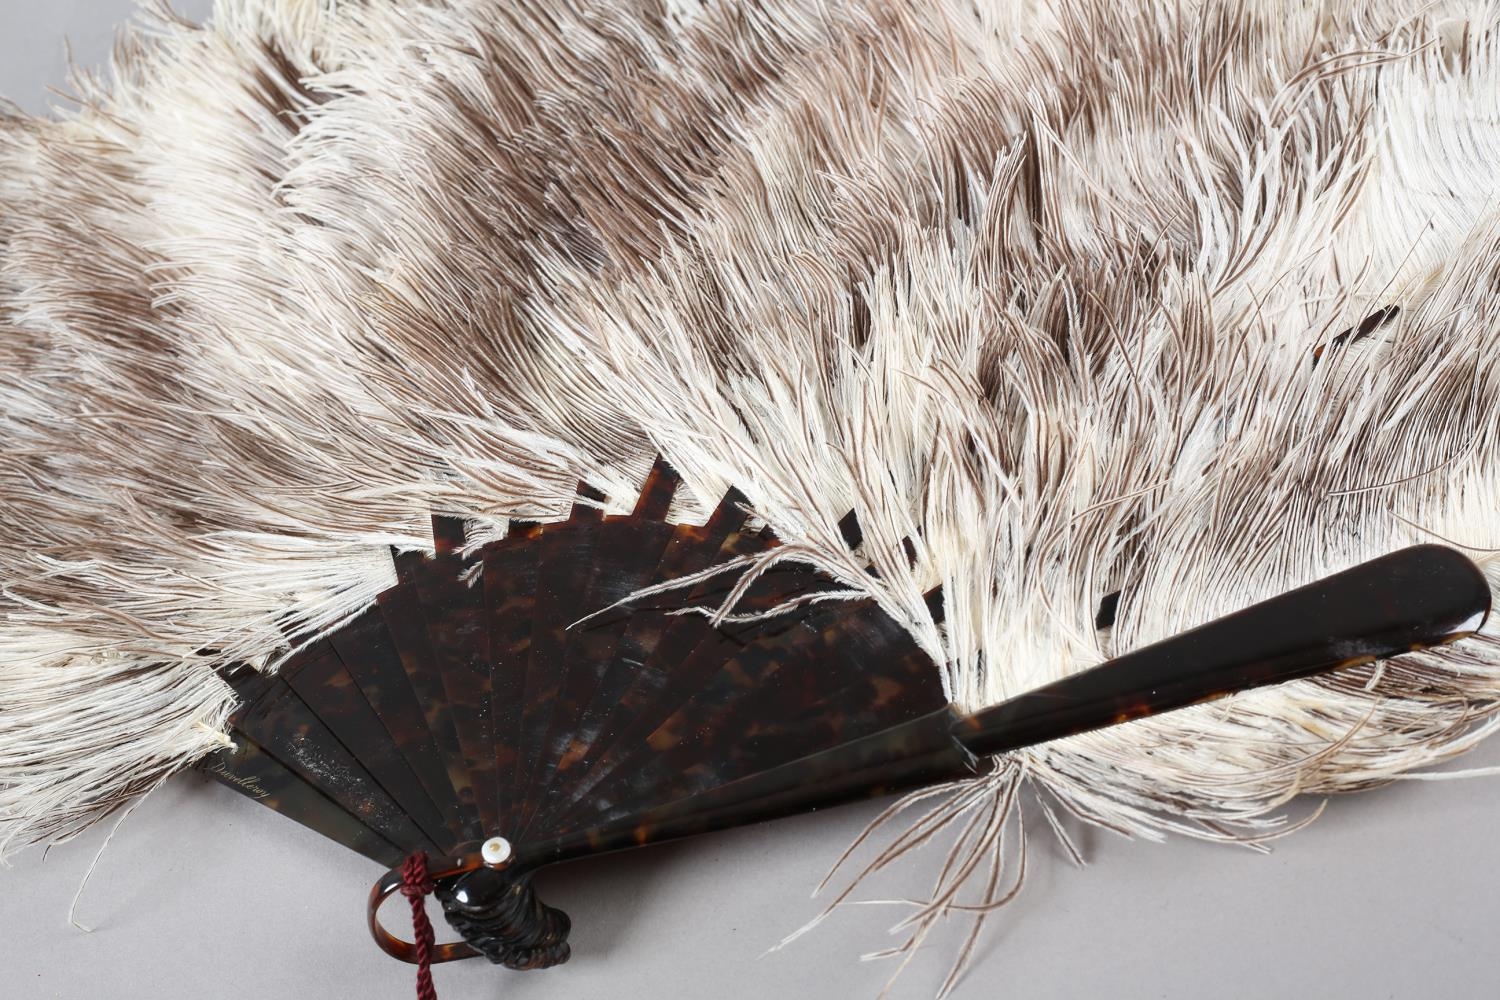 A Duvelleroy female ostrich feather fan, mounted on tortoiseshell, marked “Duvelleroy” in gold on - Image 3 of 4